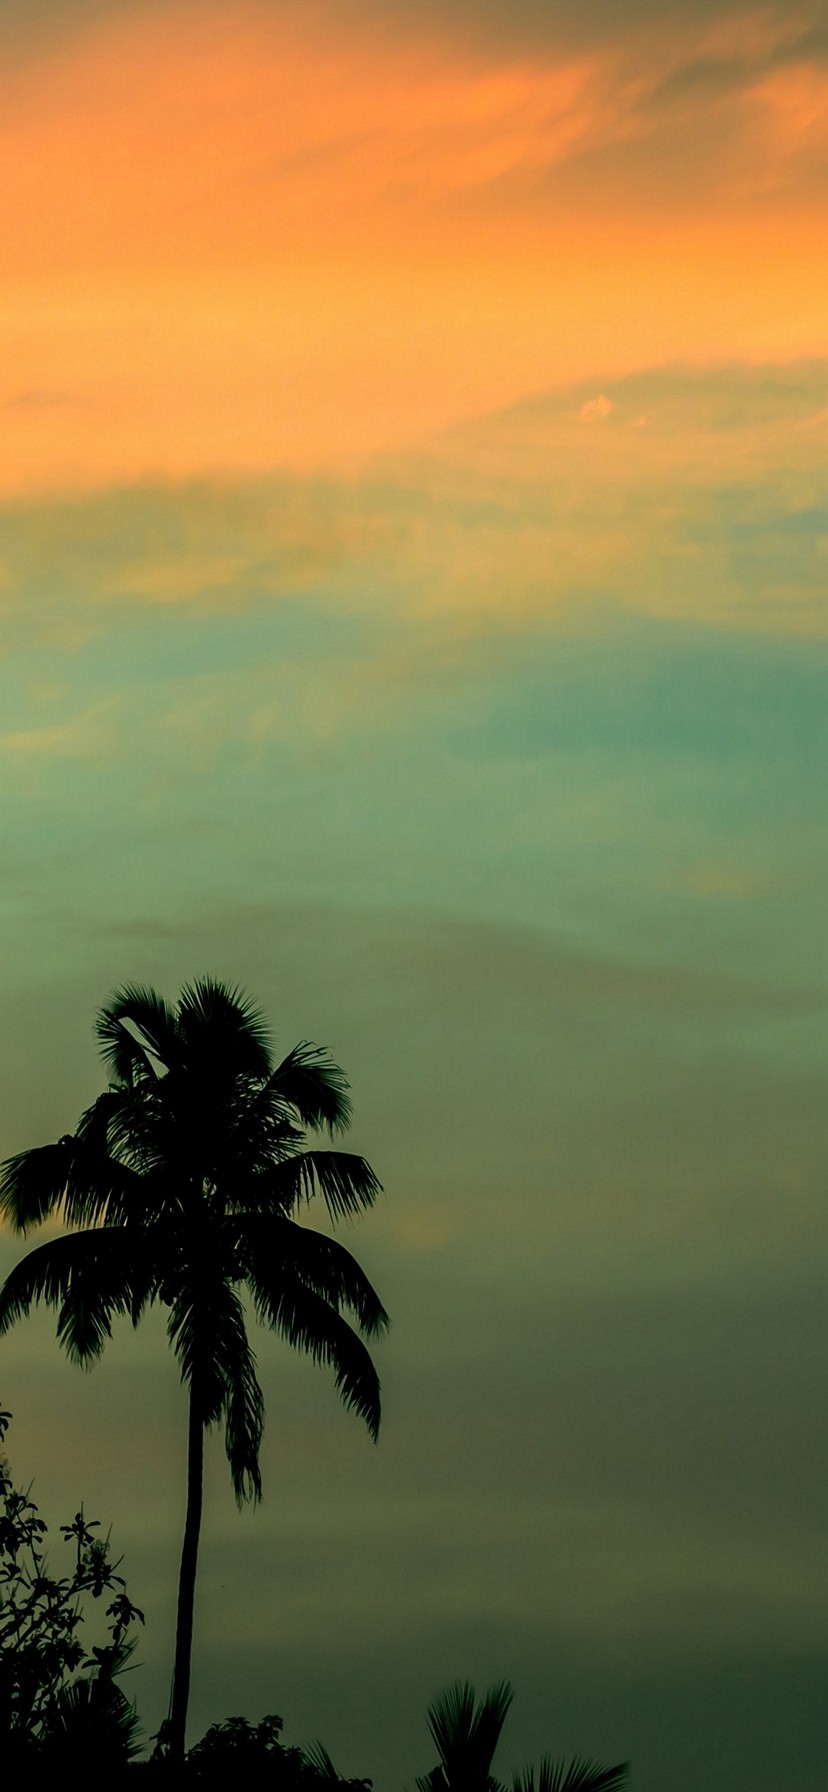 picture background wallpaper,sky,nature,tree,palm tree,calm